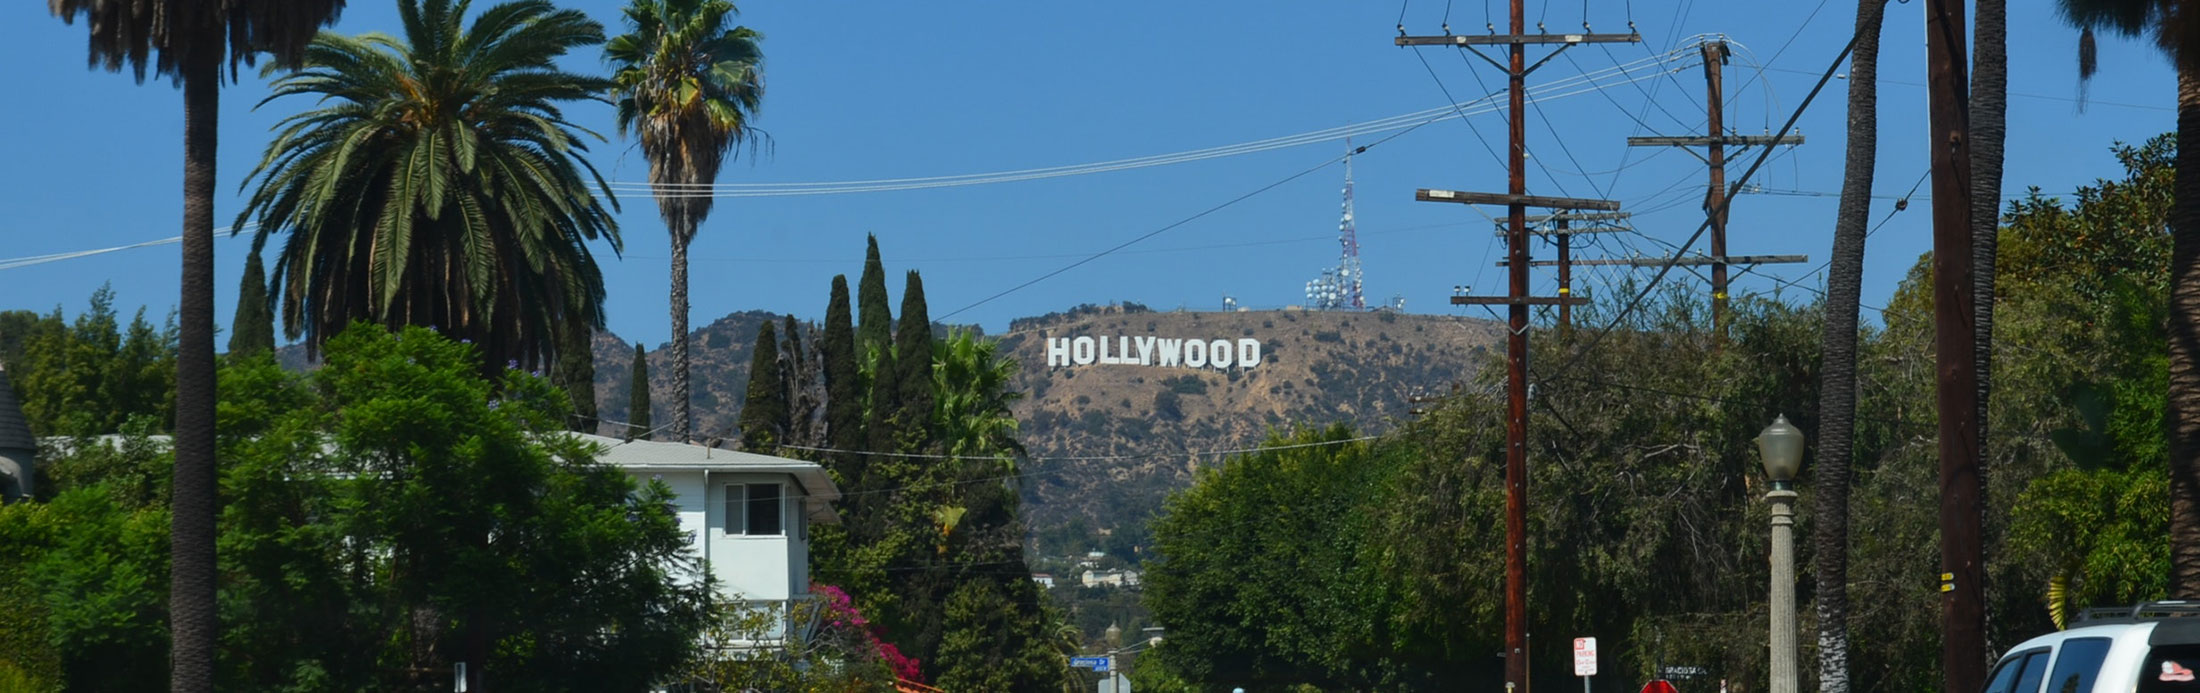 What’s Hollywood Like? (Part 1)